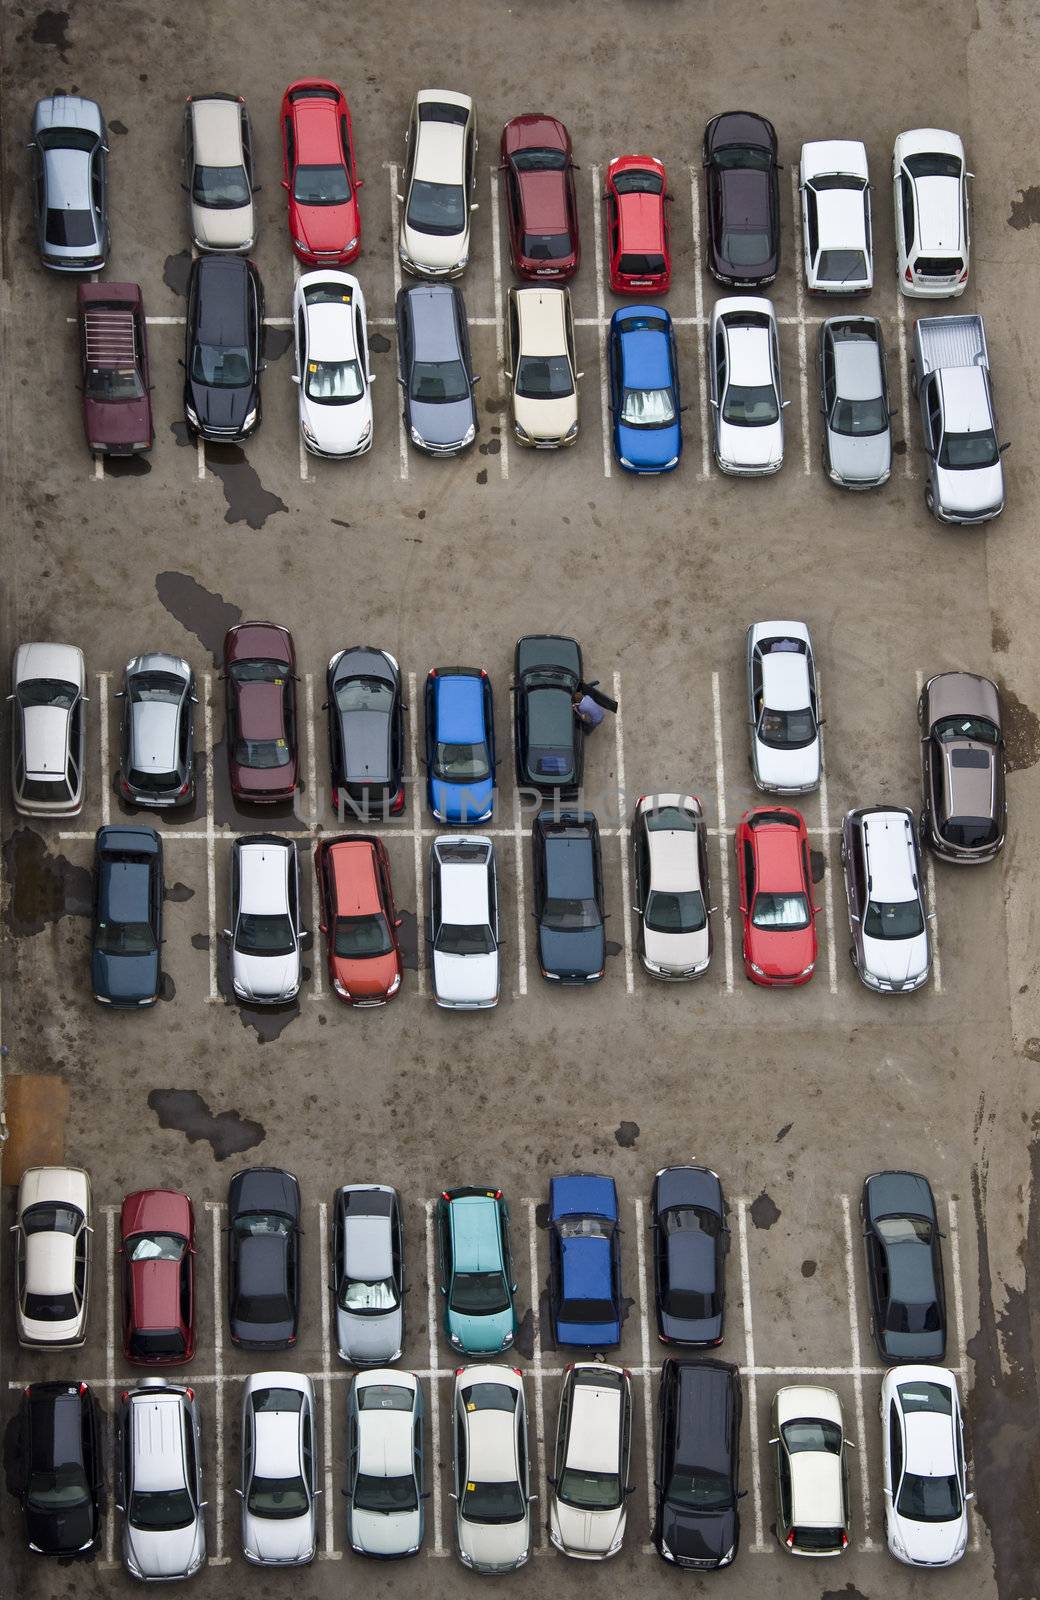 Parking with parked cars. Aerial view from a height.